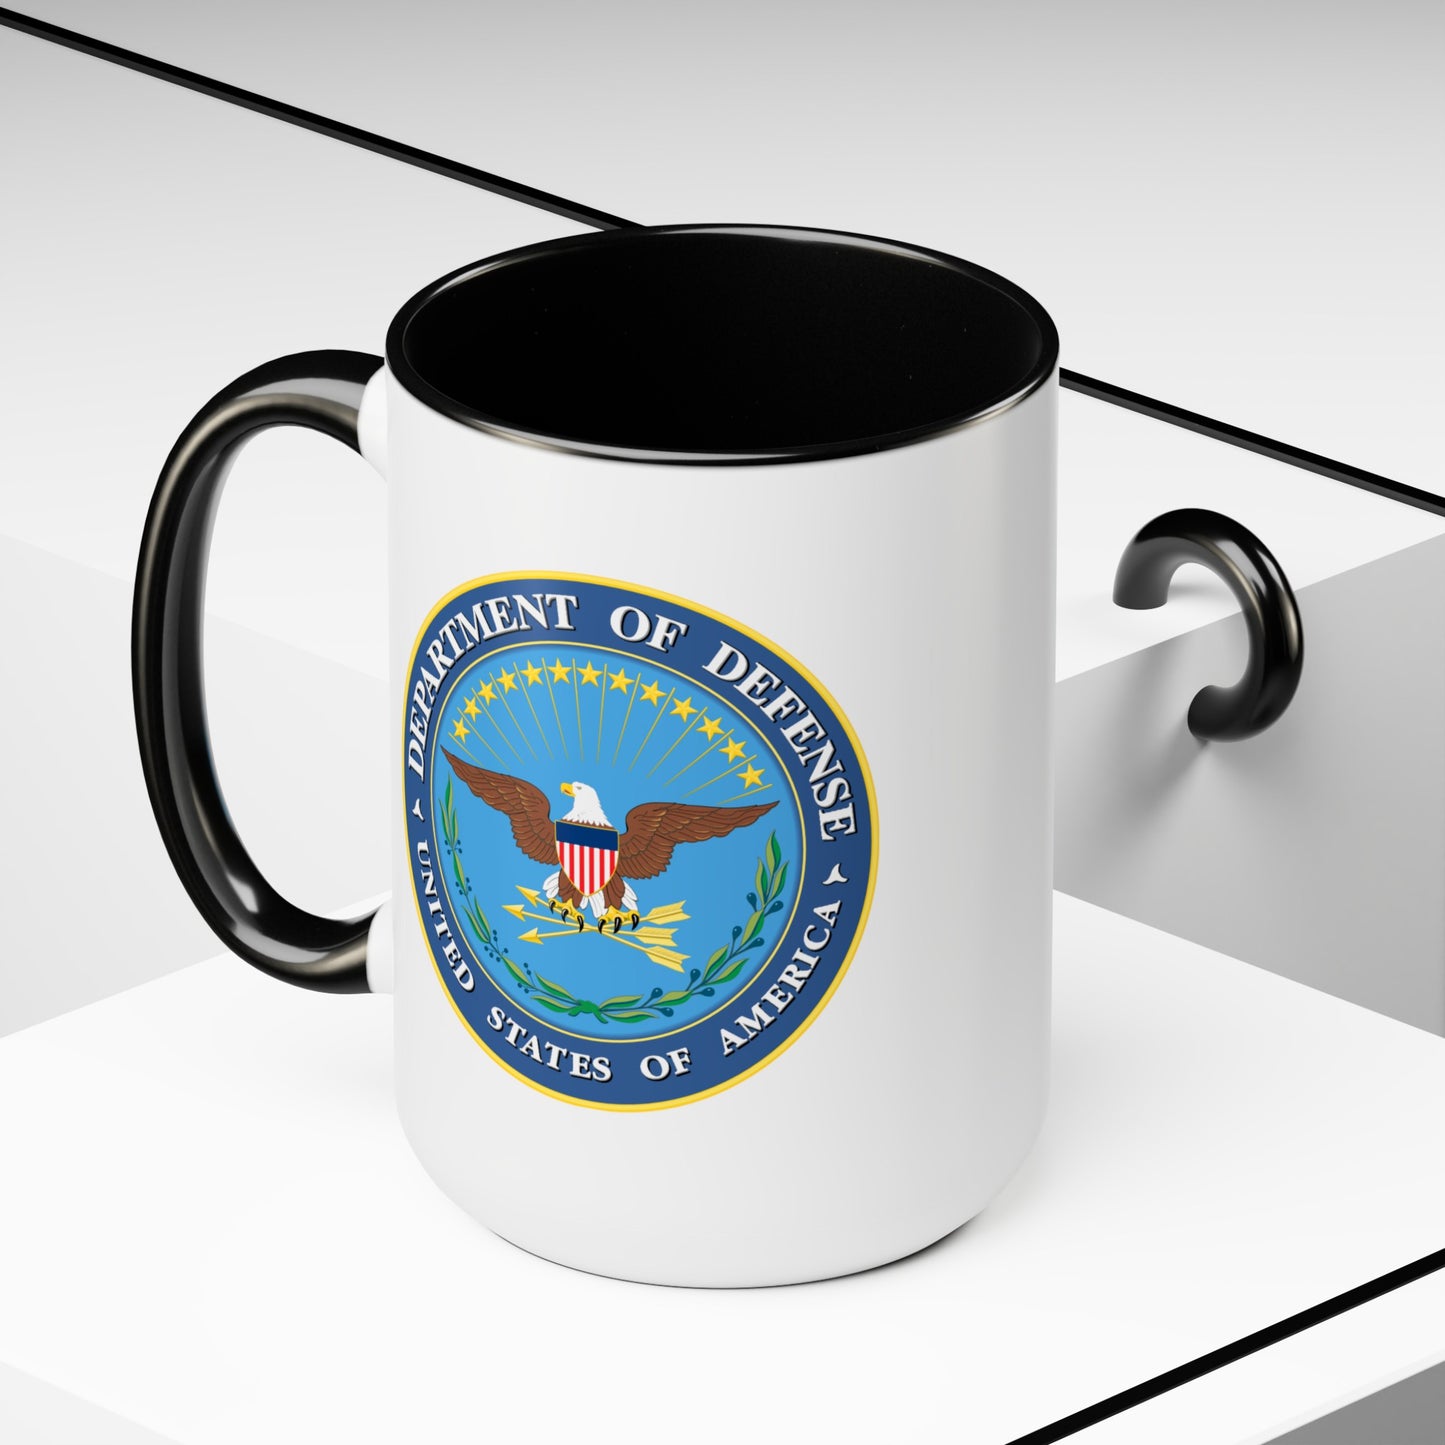 Department of Defense Coffee Mug - Double Sided Black Accent White Ceramic 15oz by TheGlassyLass.com